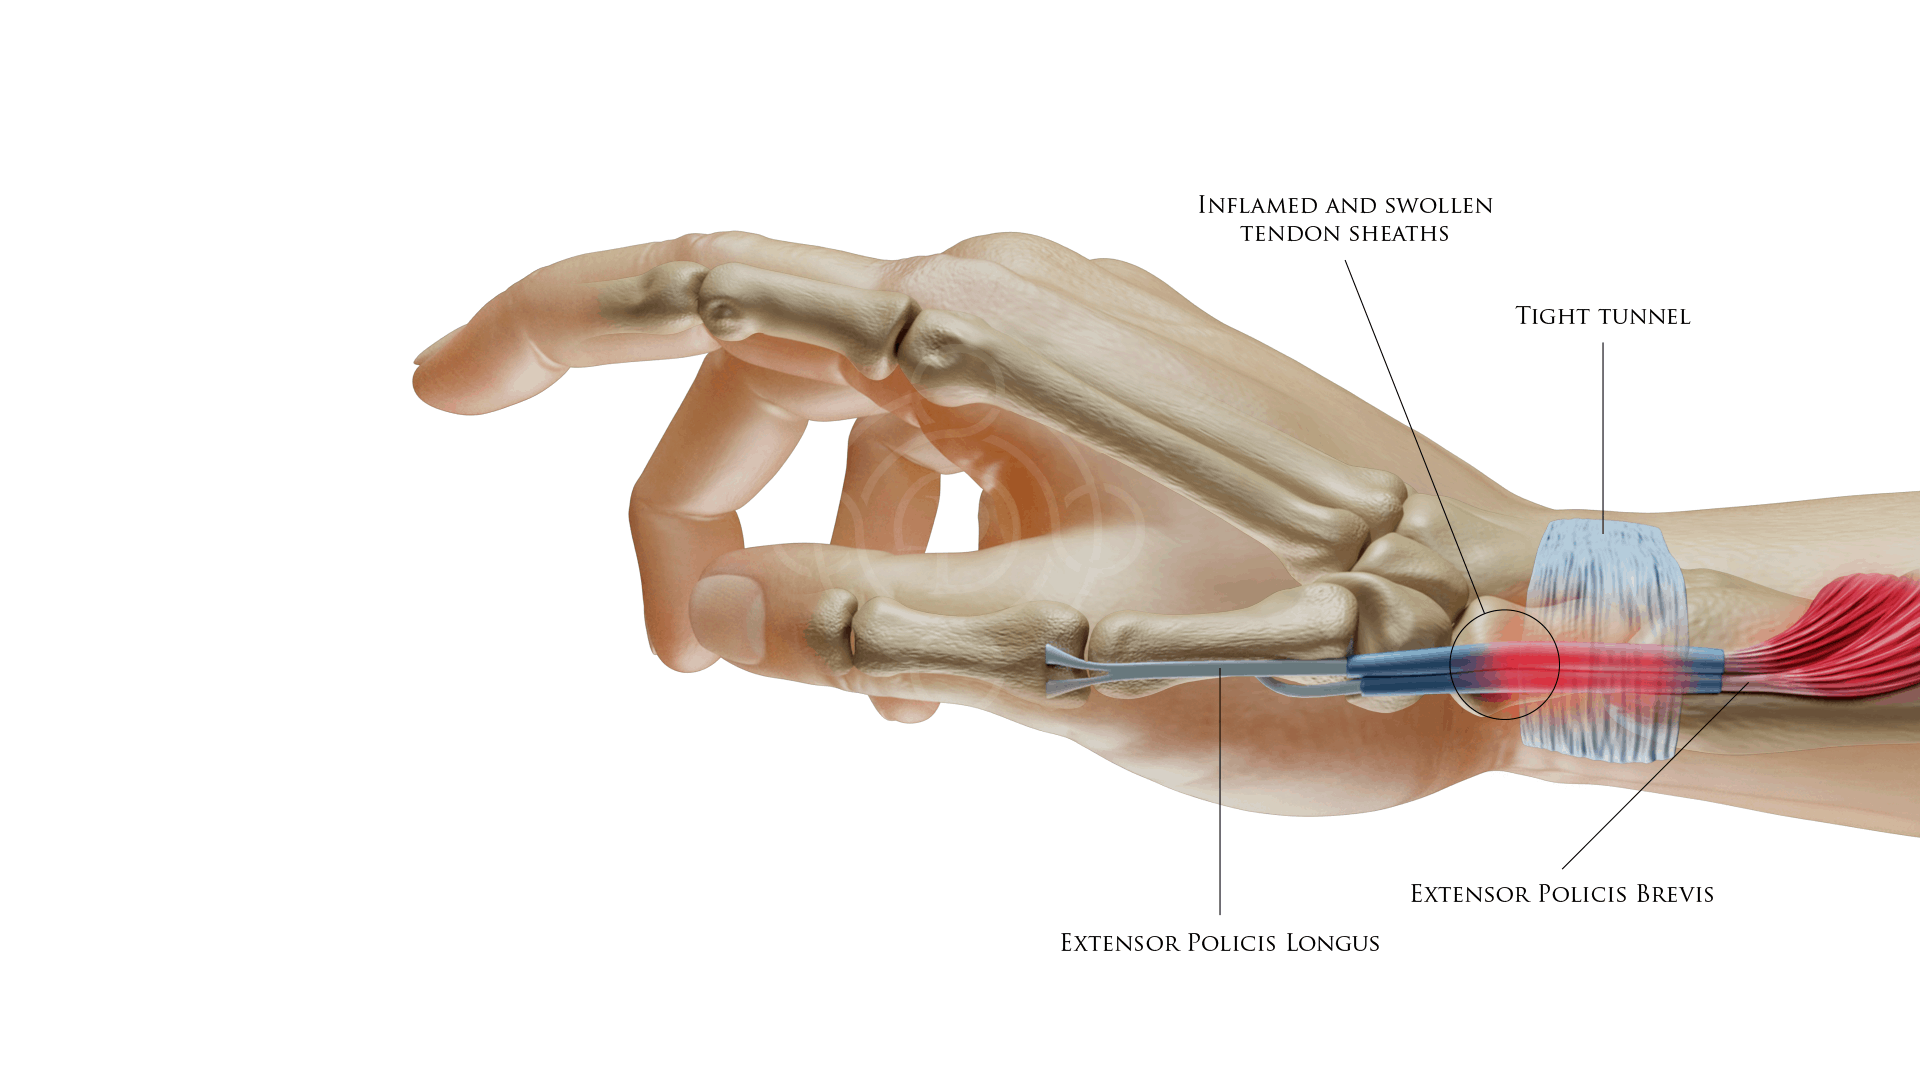 DeQuervain's Tenosynovitis: Inflamed and Swollen Tendon Sheaths, Tight Tunnel